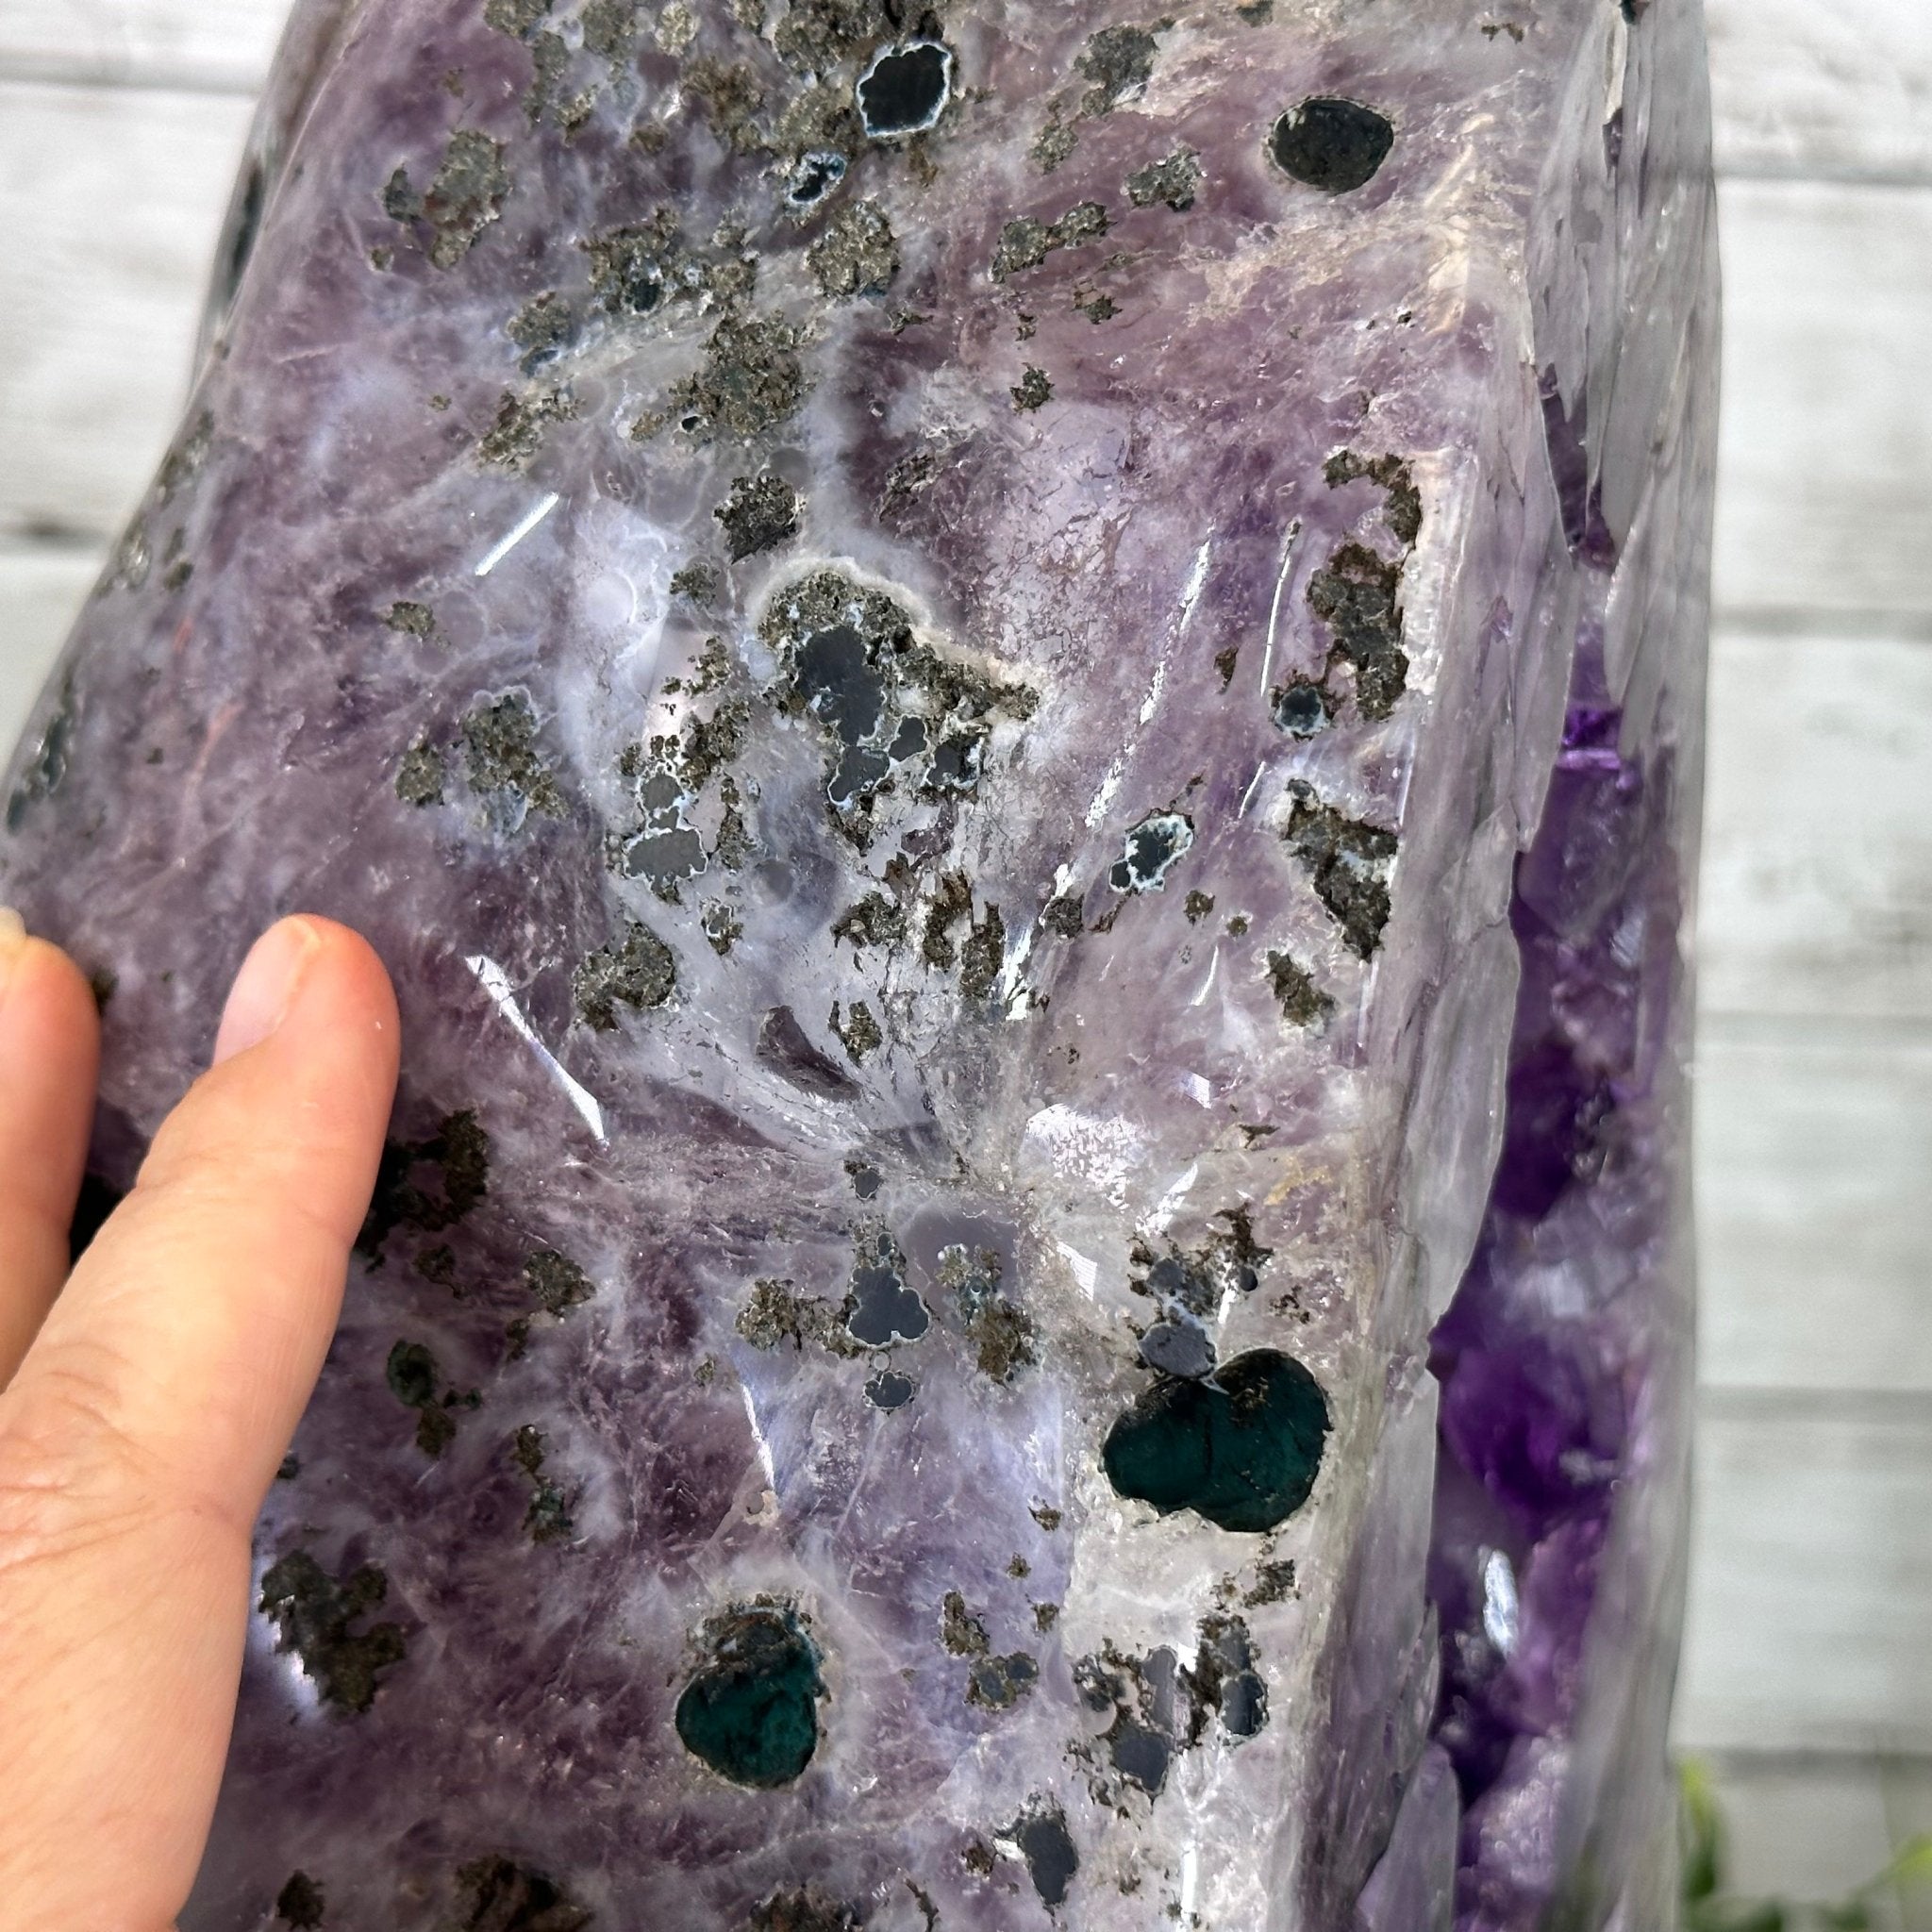 Extra Quality Polished Brazilian Amethyst Cathedral, 37 lbs & 13.5" tall Model #5602-0189 by Brazil Gems - Brazil GemsBrazil GemsExtra Quality Polished Brazilian Amethyst Cathedral, 37 lbs & 13.5" tall Model #5602-0189 by Brazil GemsPolished Cathedrals5602-0189